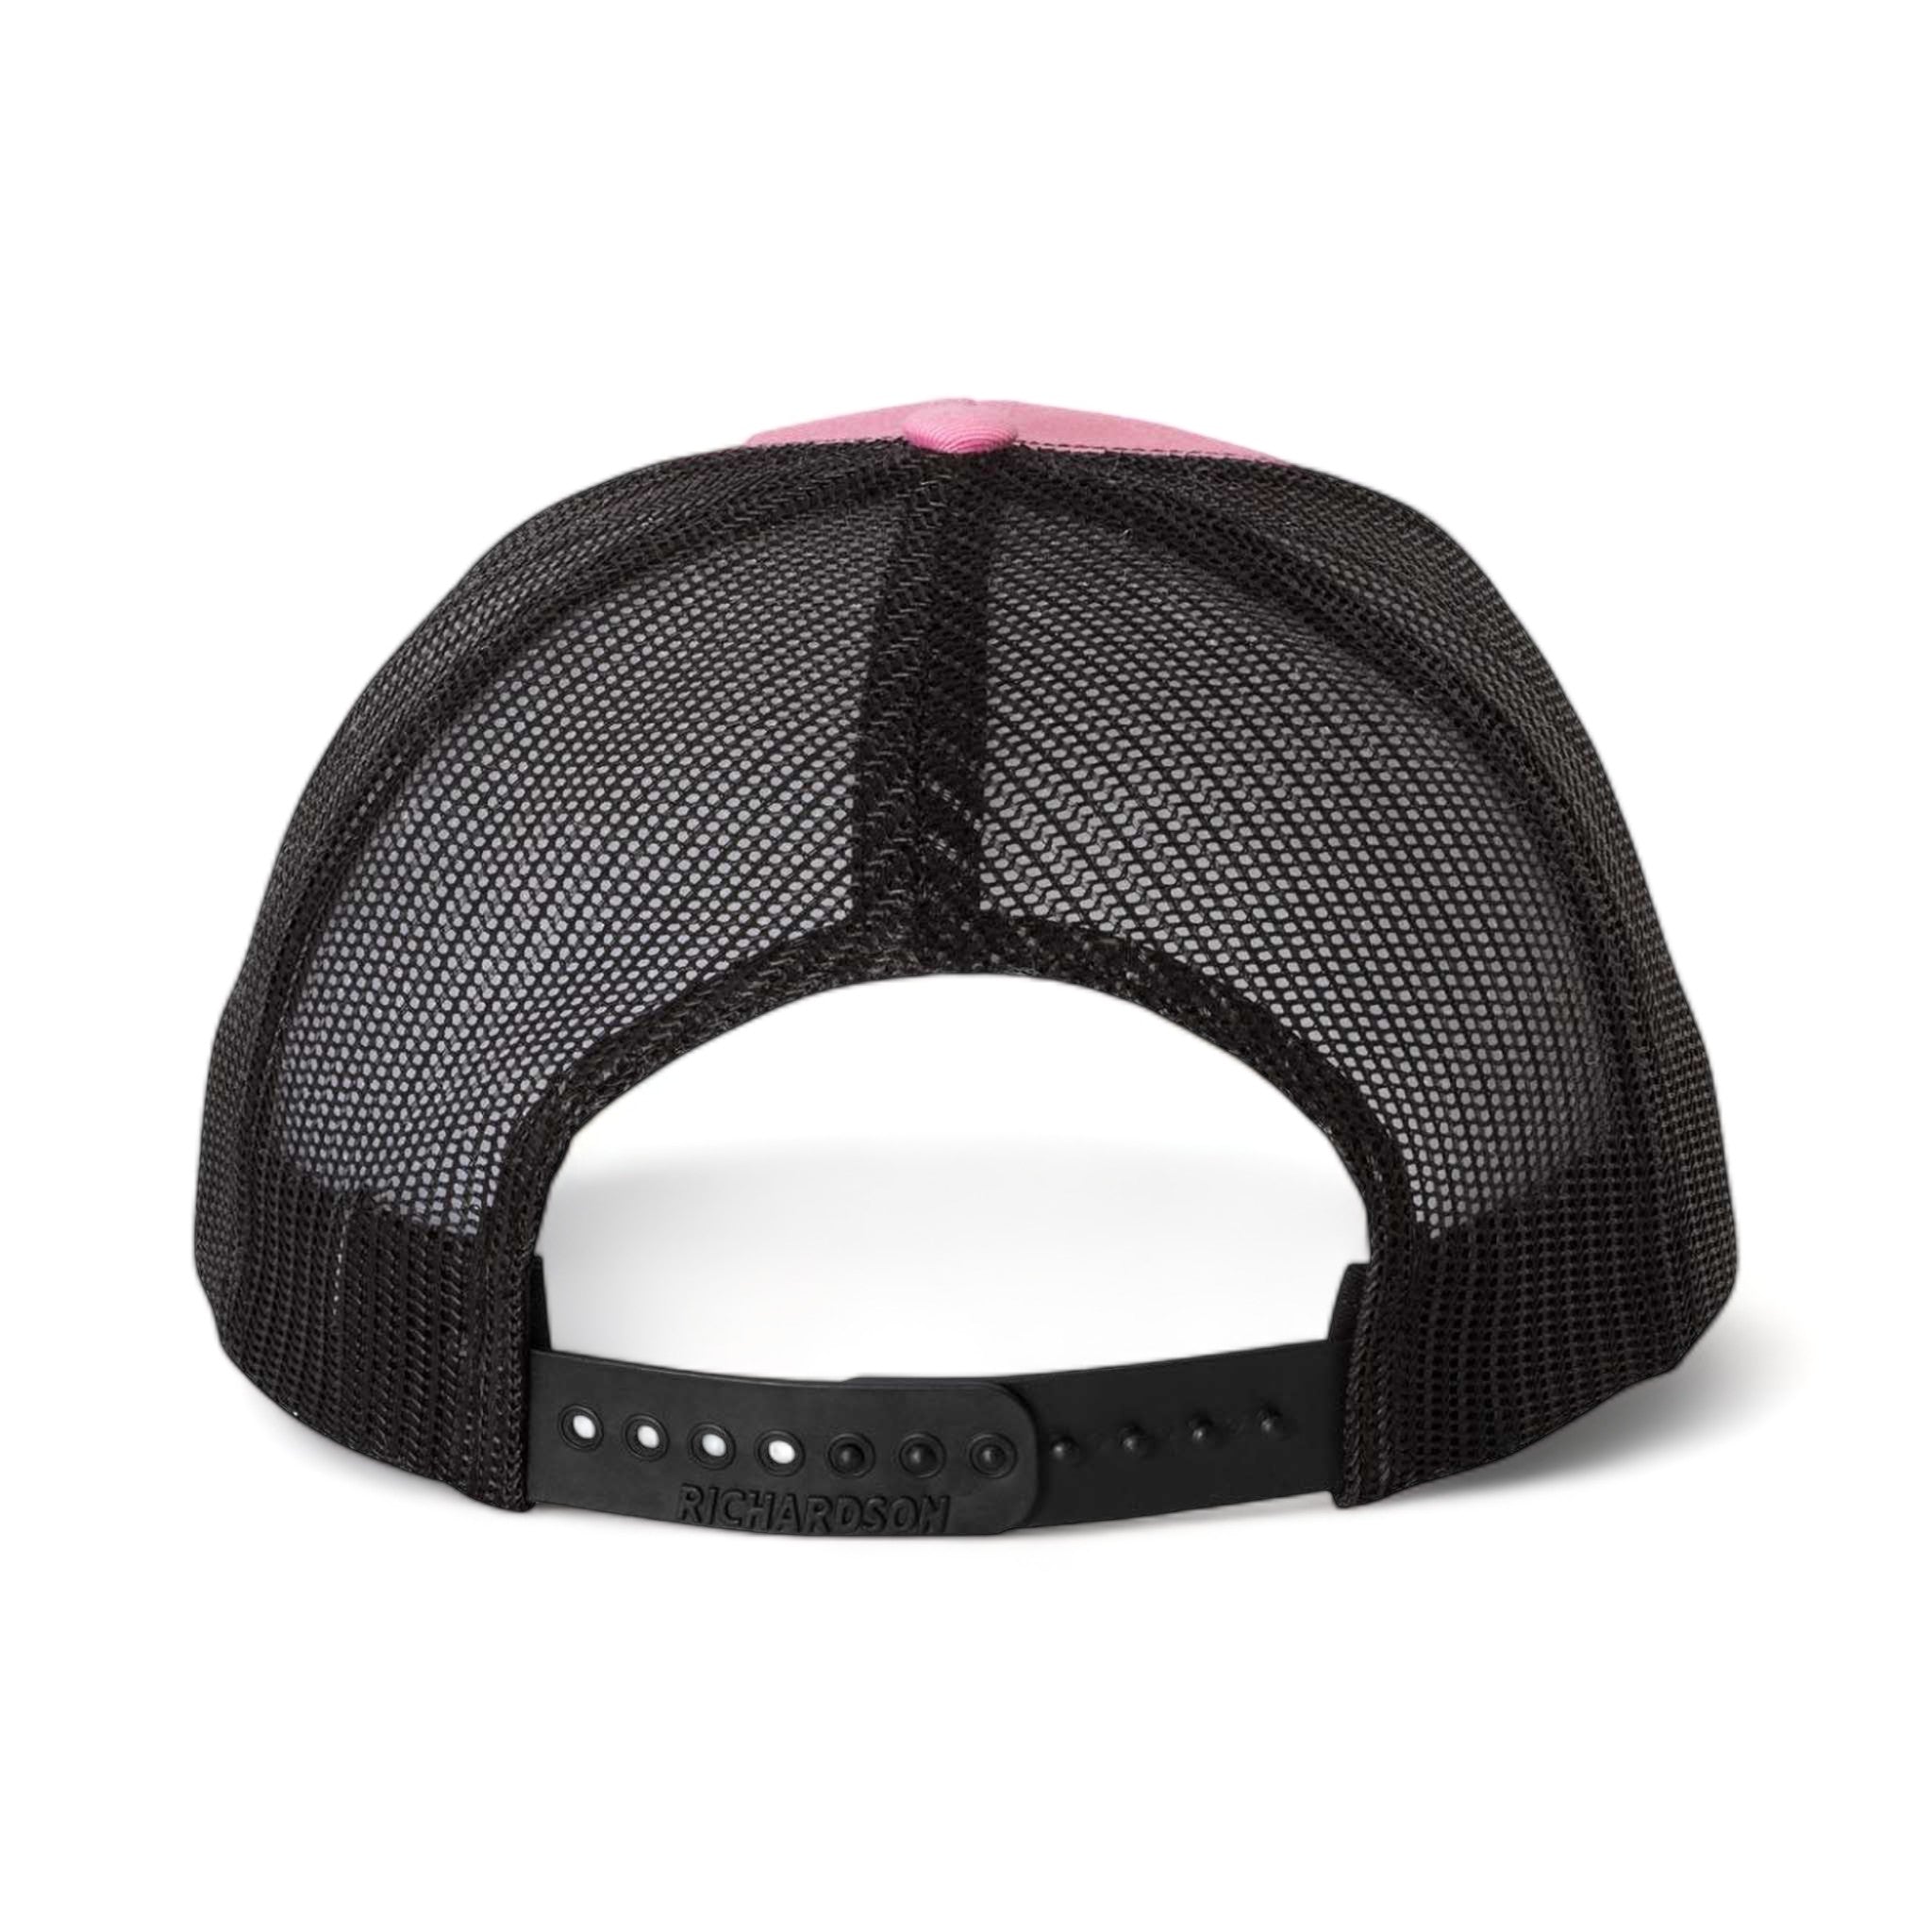 Back view of Richardson 112 custom hat in hot pink and black